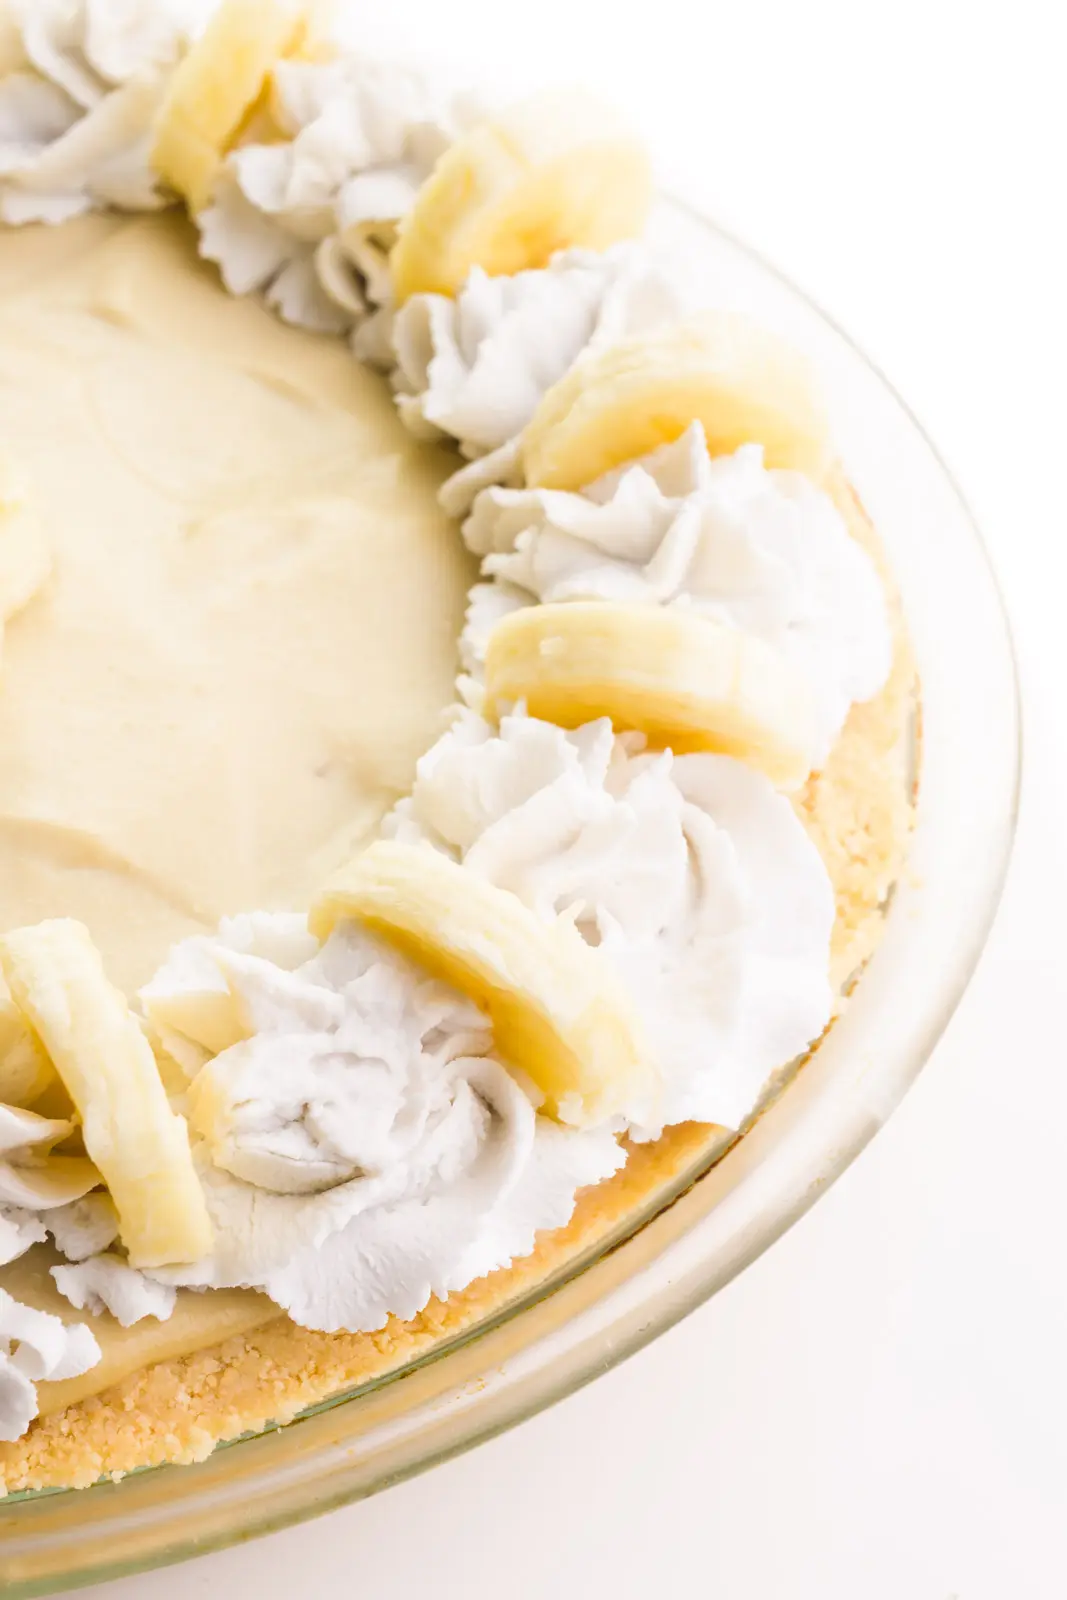 Looking down on the edge of a banana cream pie with decorative coconut cream and banana slices on top.